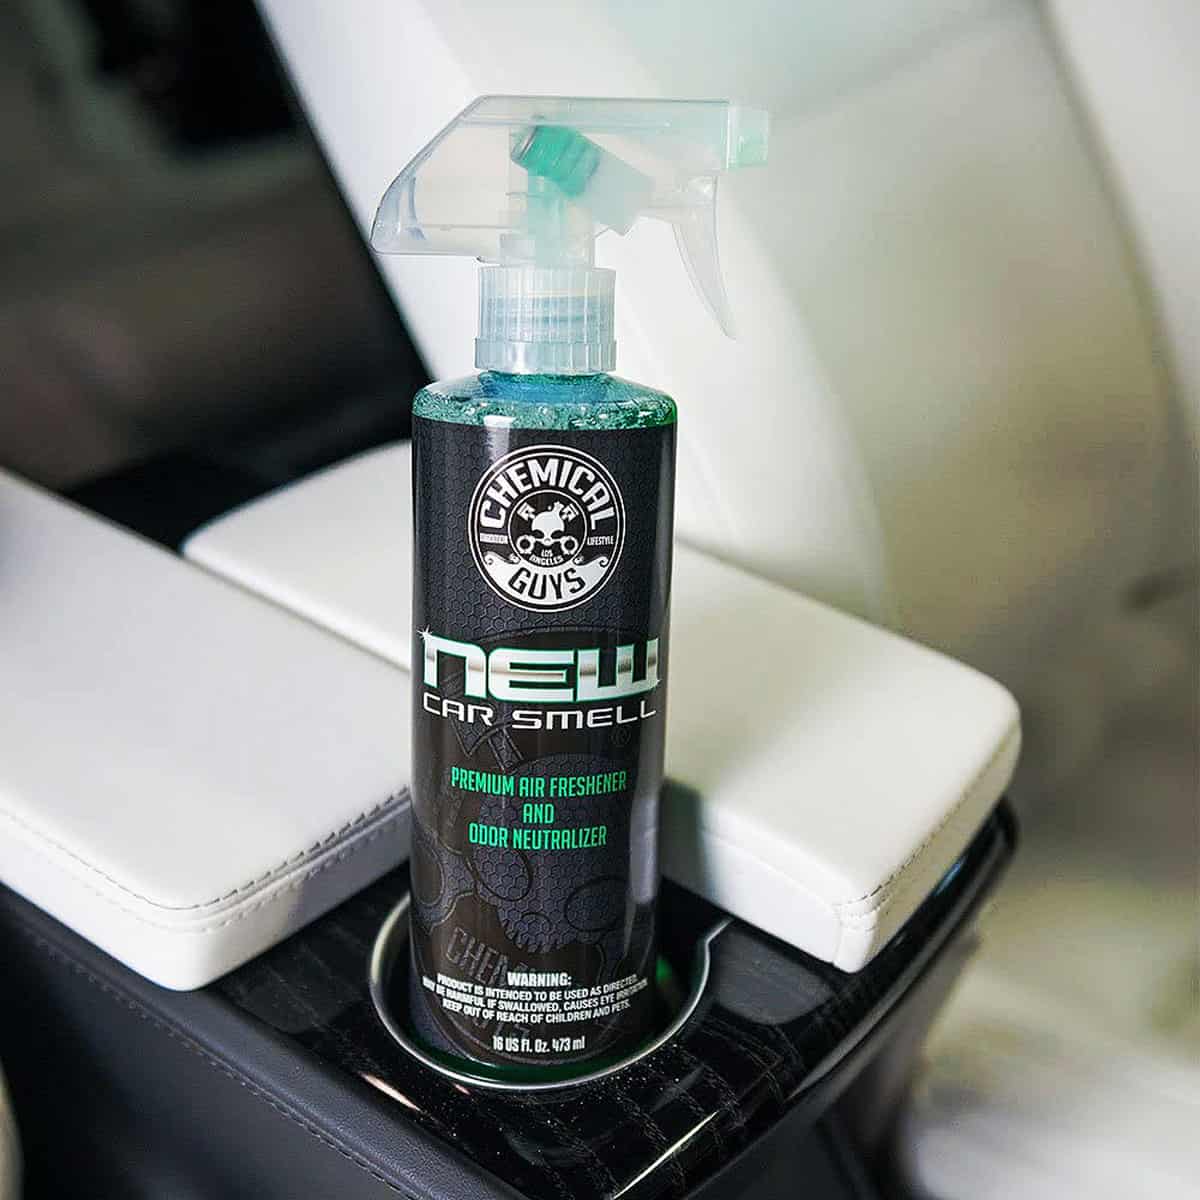 Chemical Guys New Car Smell Premium Air Freshener: Their best-selling car scent 2